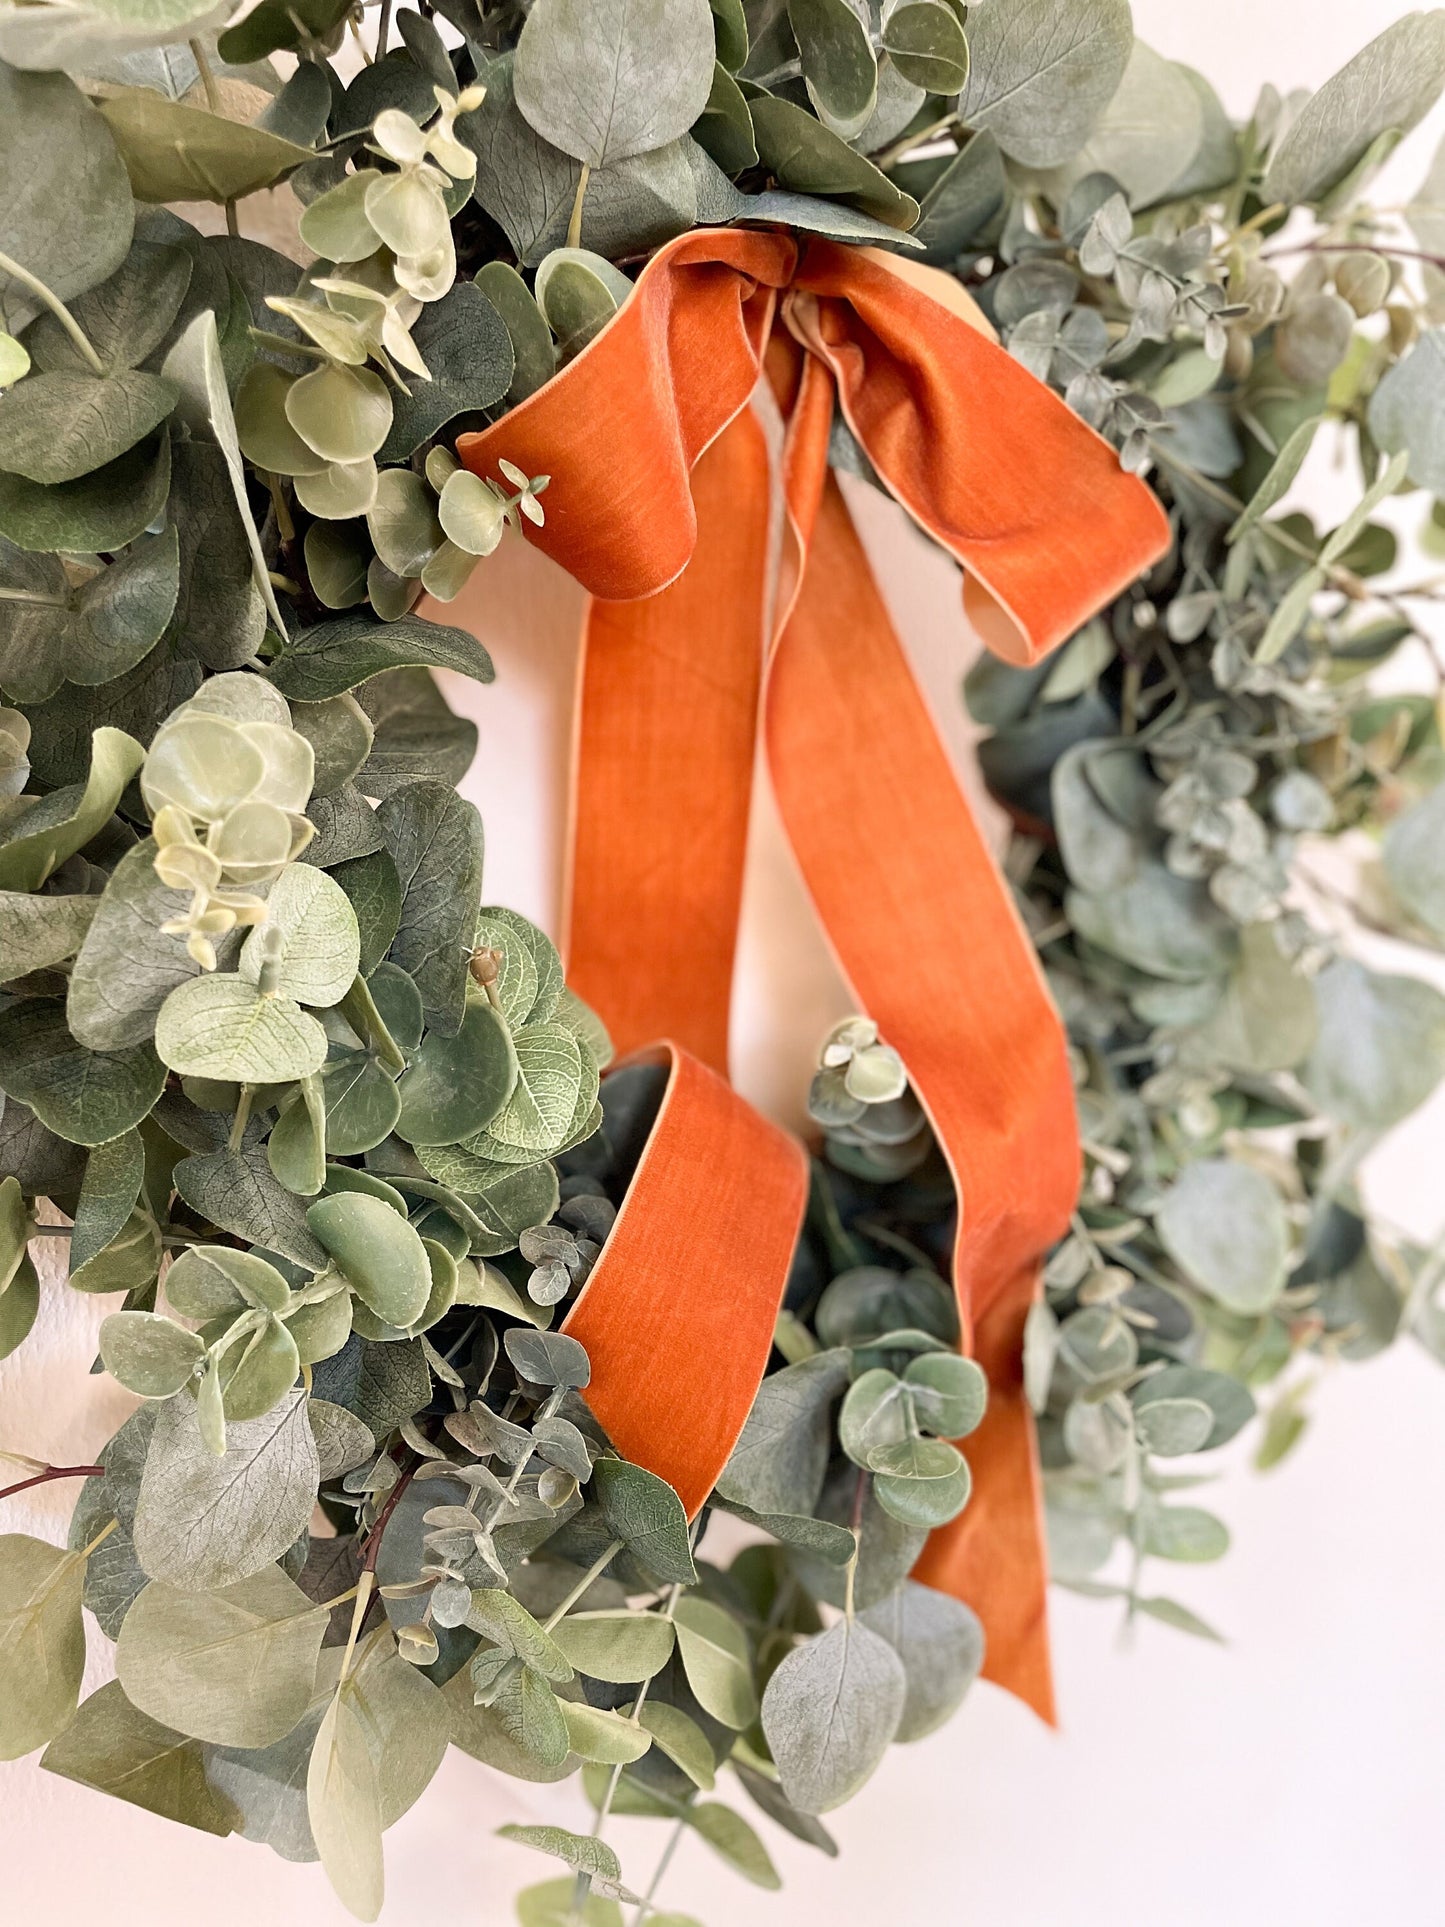 Eucalyptus Wreath with Velvet Ribbon for Fall, Year Round Wreath, Front Door Decor, Faux Everyday Wreath, Fake Greenery for Mantle Indoor